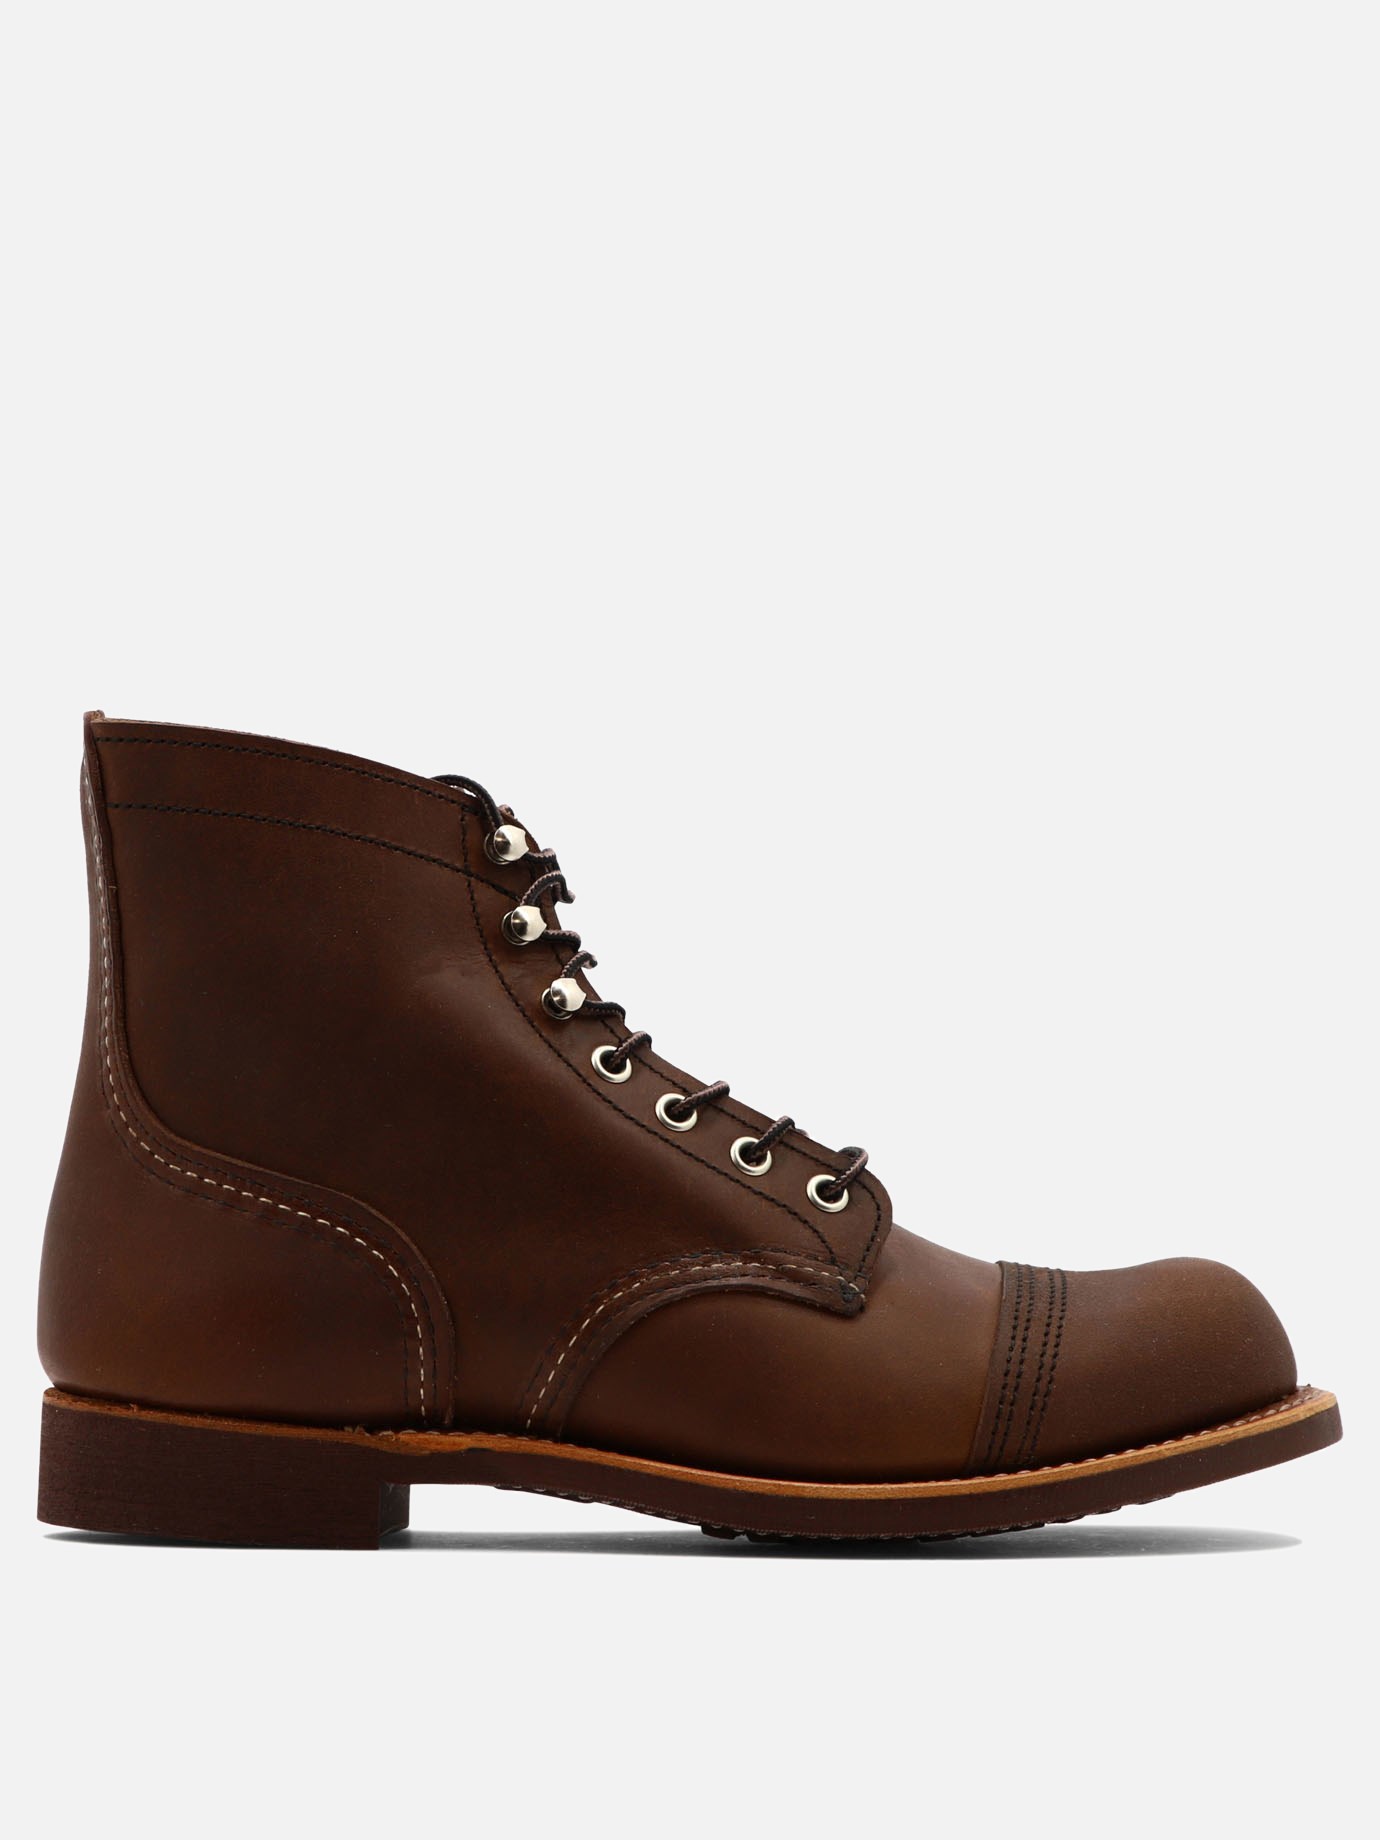 Stivaletti  Iron Ranger  by Red Wing Shoes